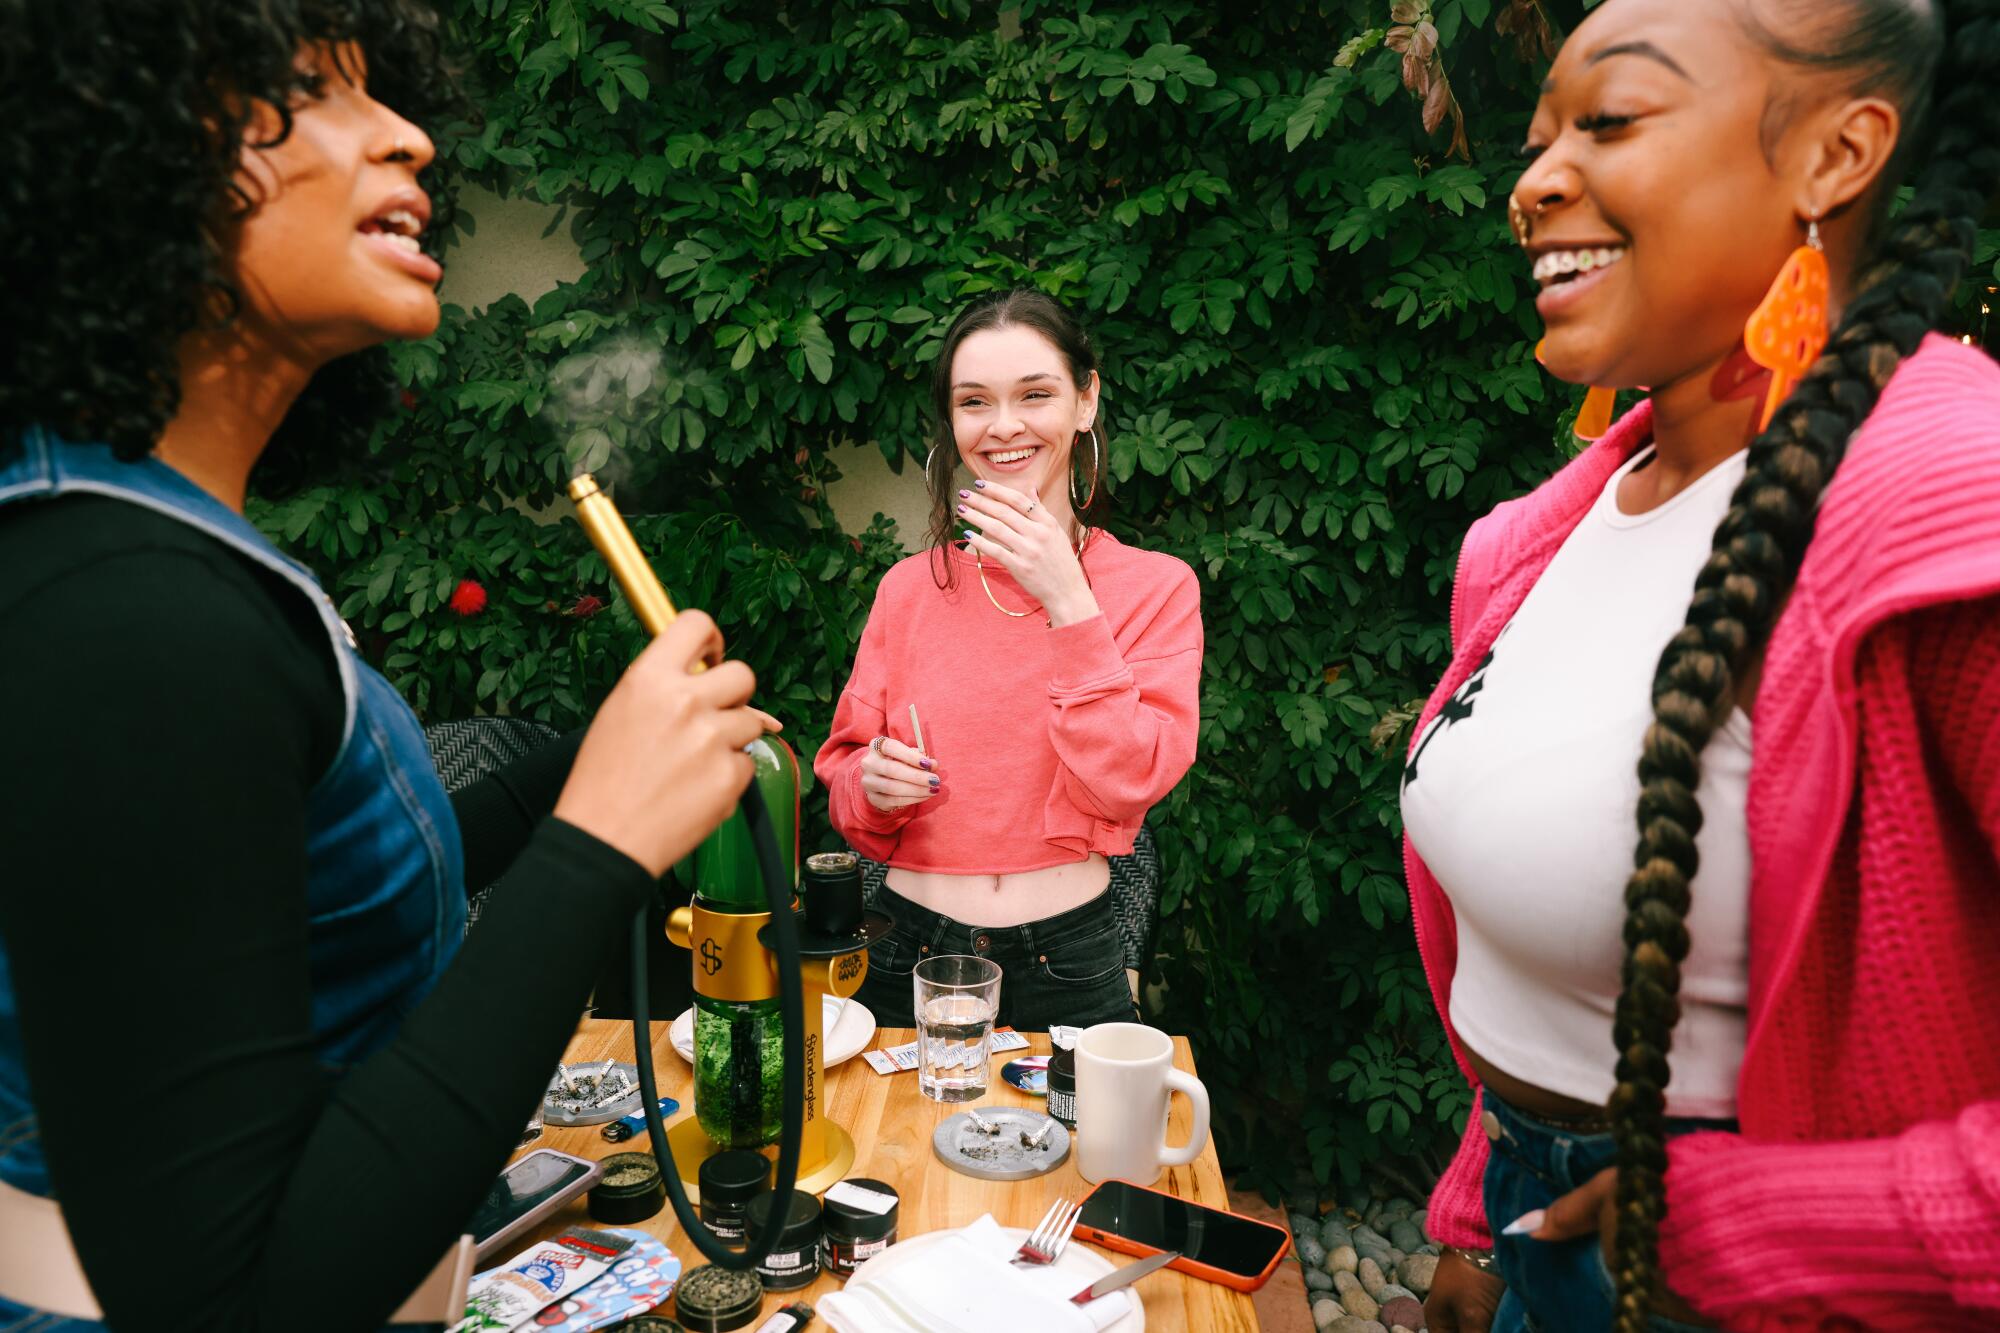 Three women laughing, one holding a bong mouthpiece and another holding a joint, at a table covered with cannabis products.